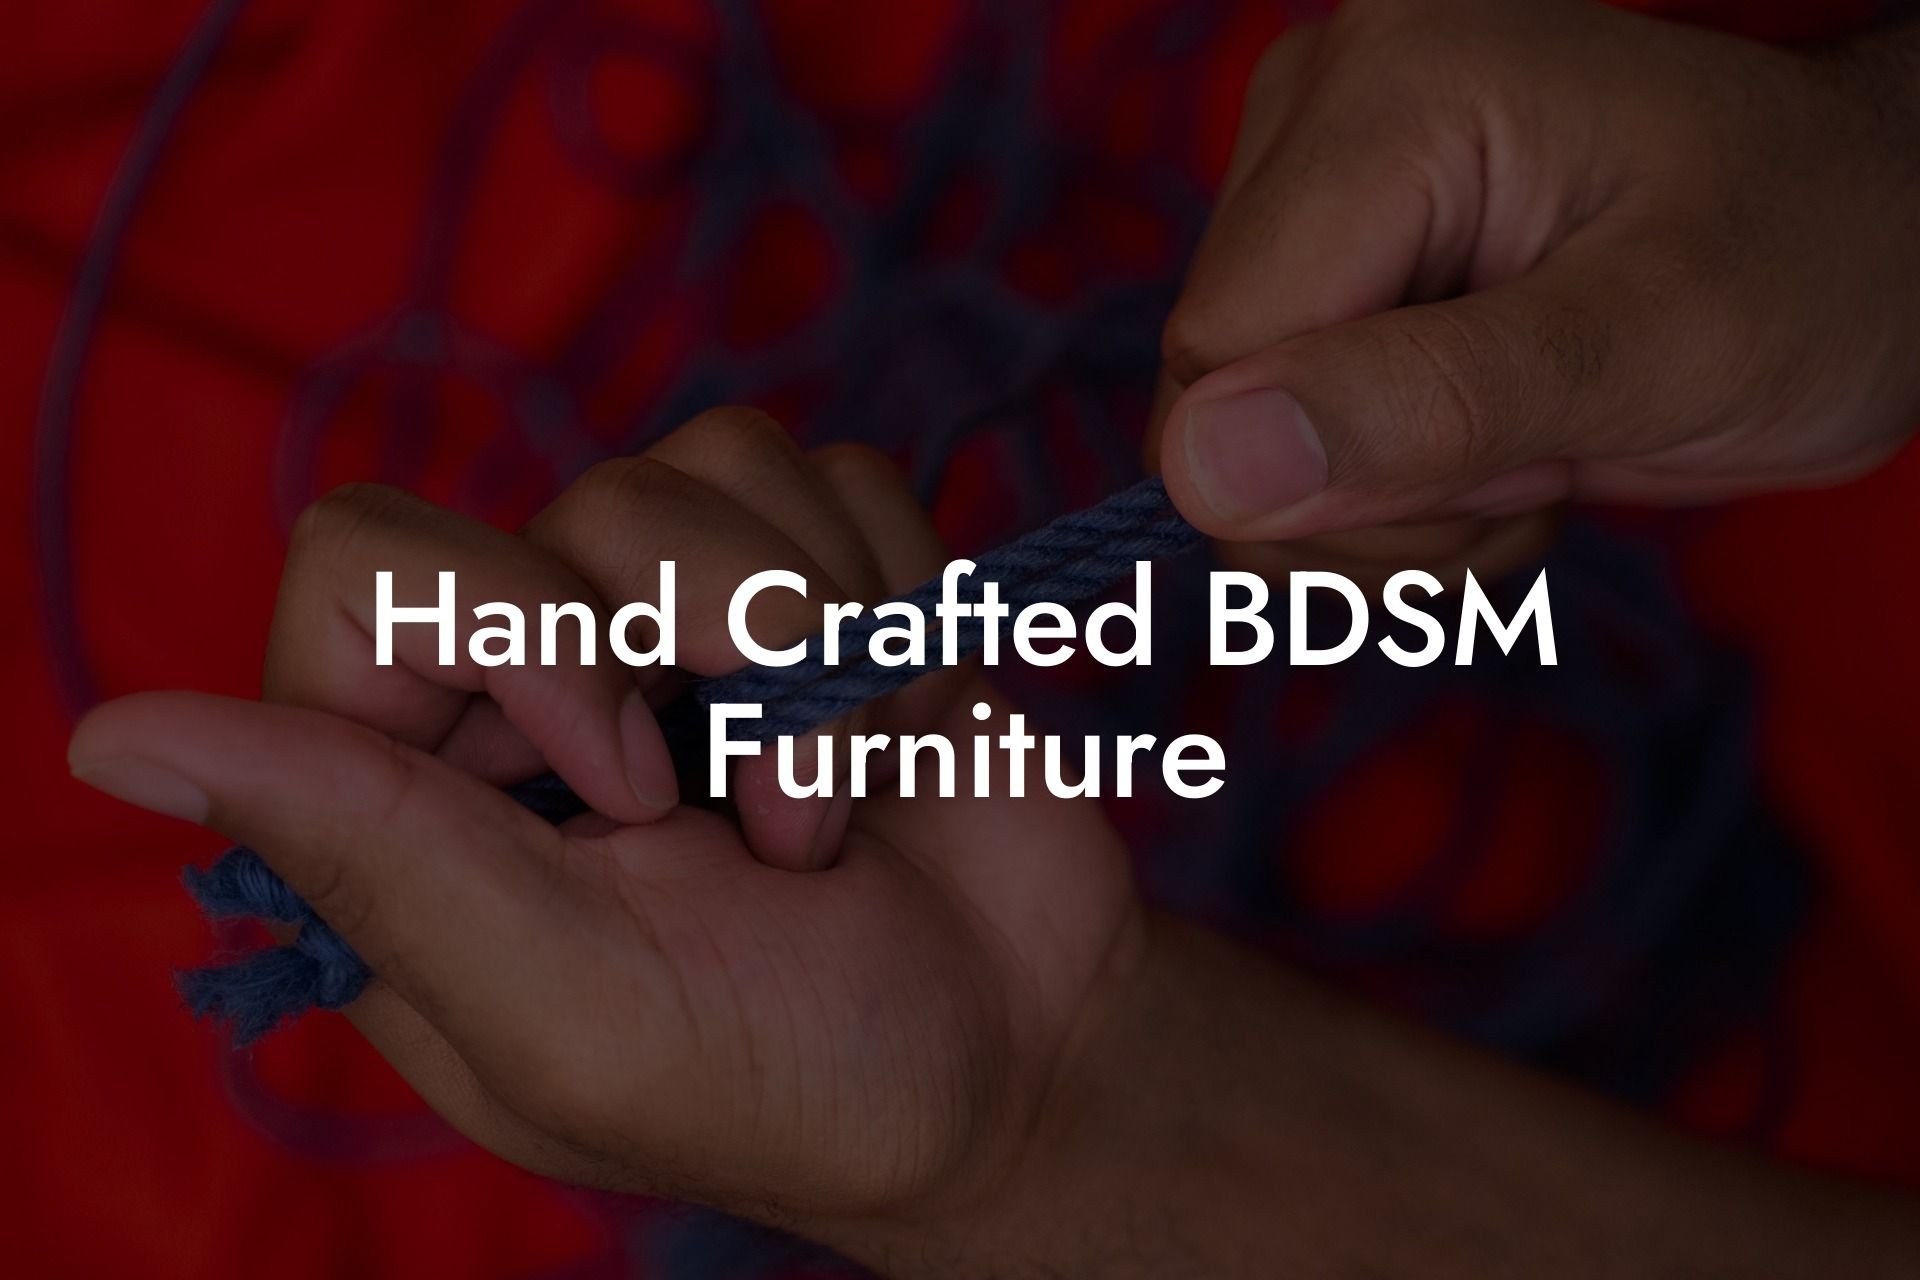 Hand Crafted BDSM Furniture